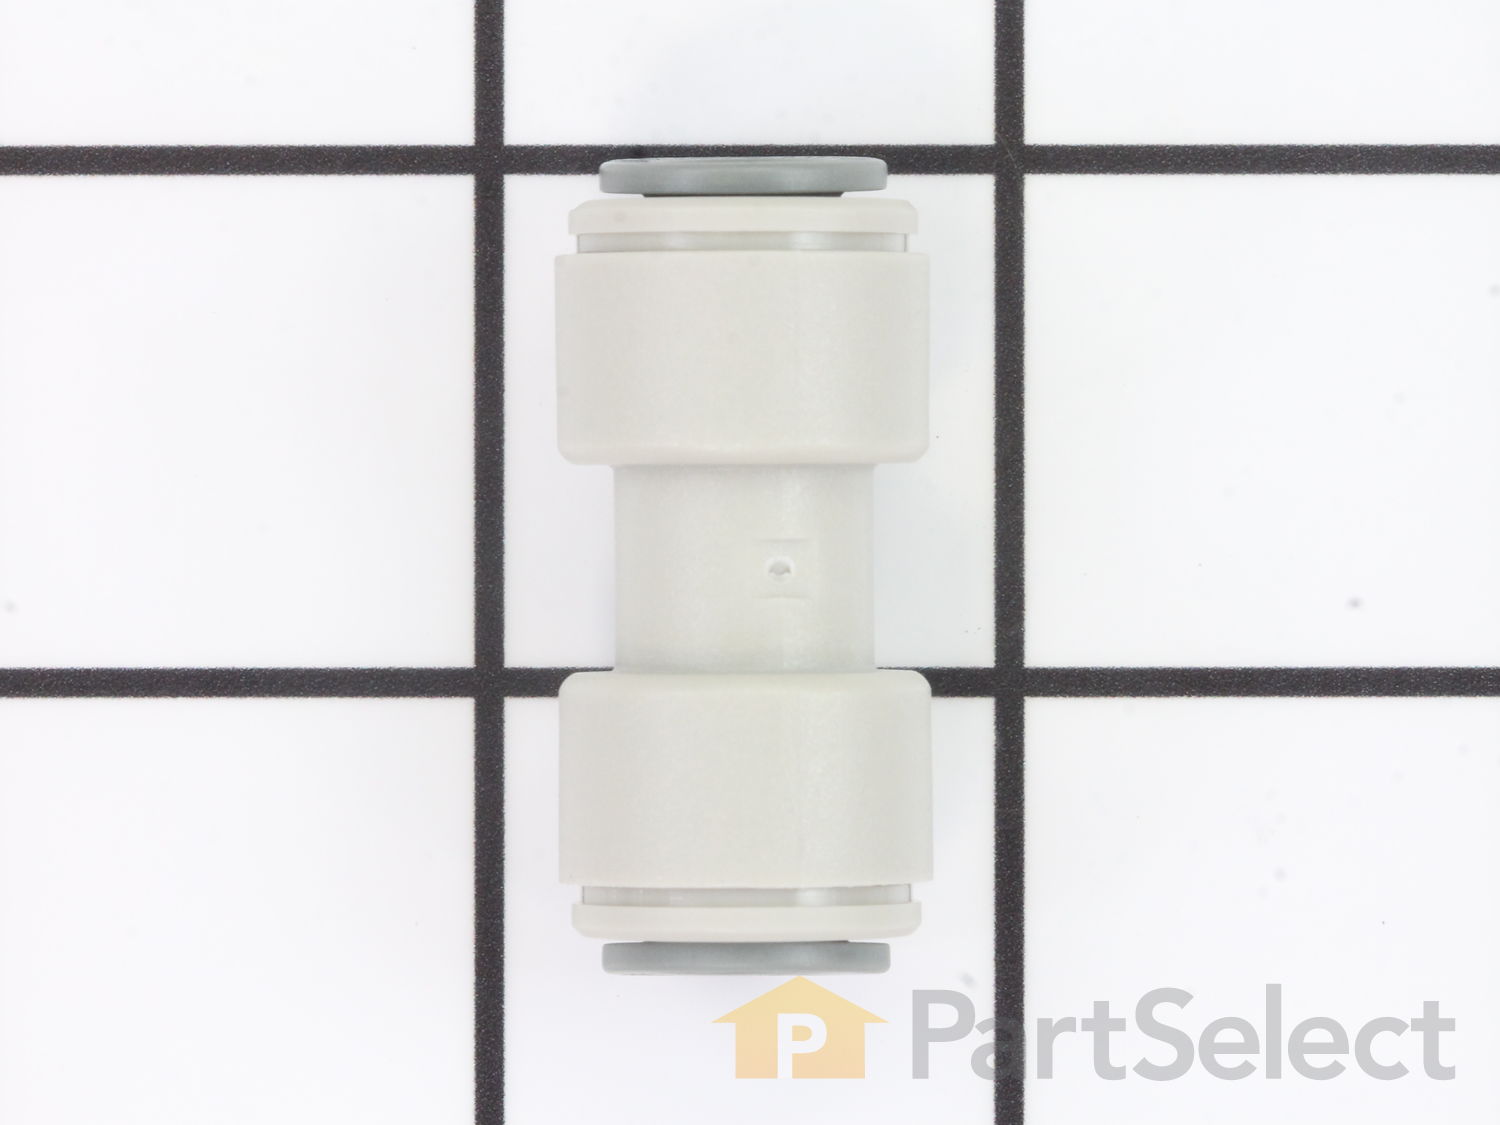 OEM GE Refrigerator Water Supply Line Connector WR02X11330 for sale online 